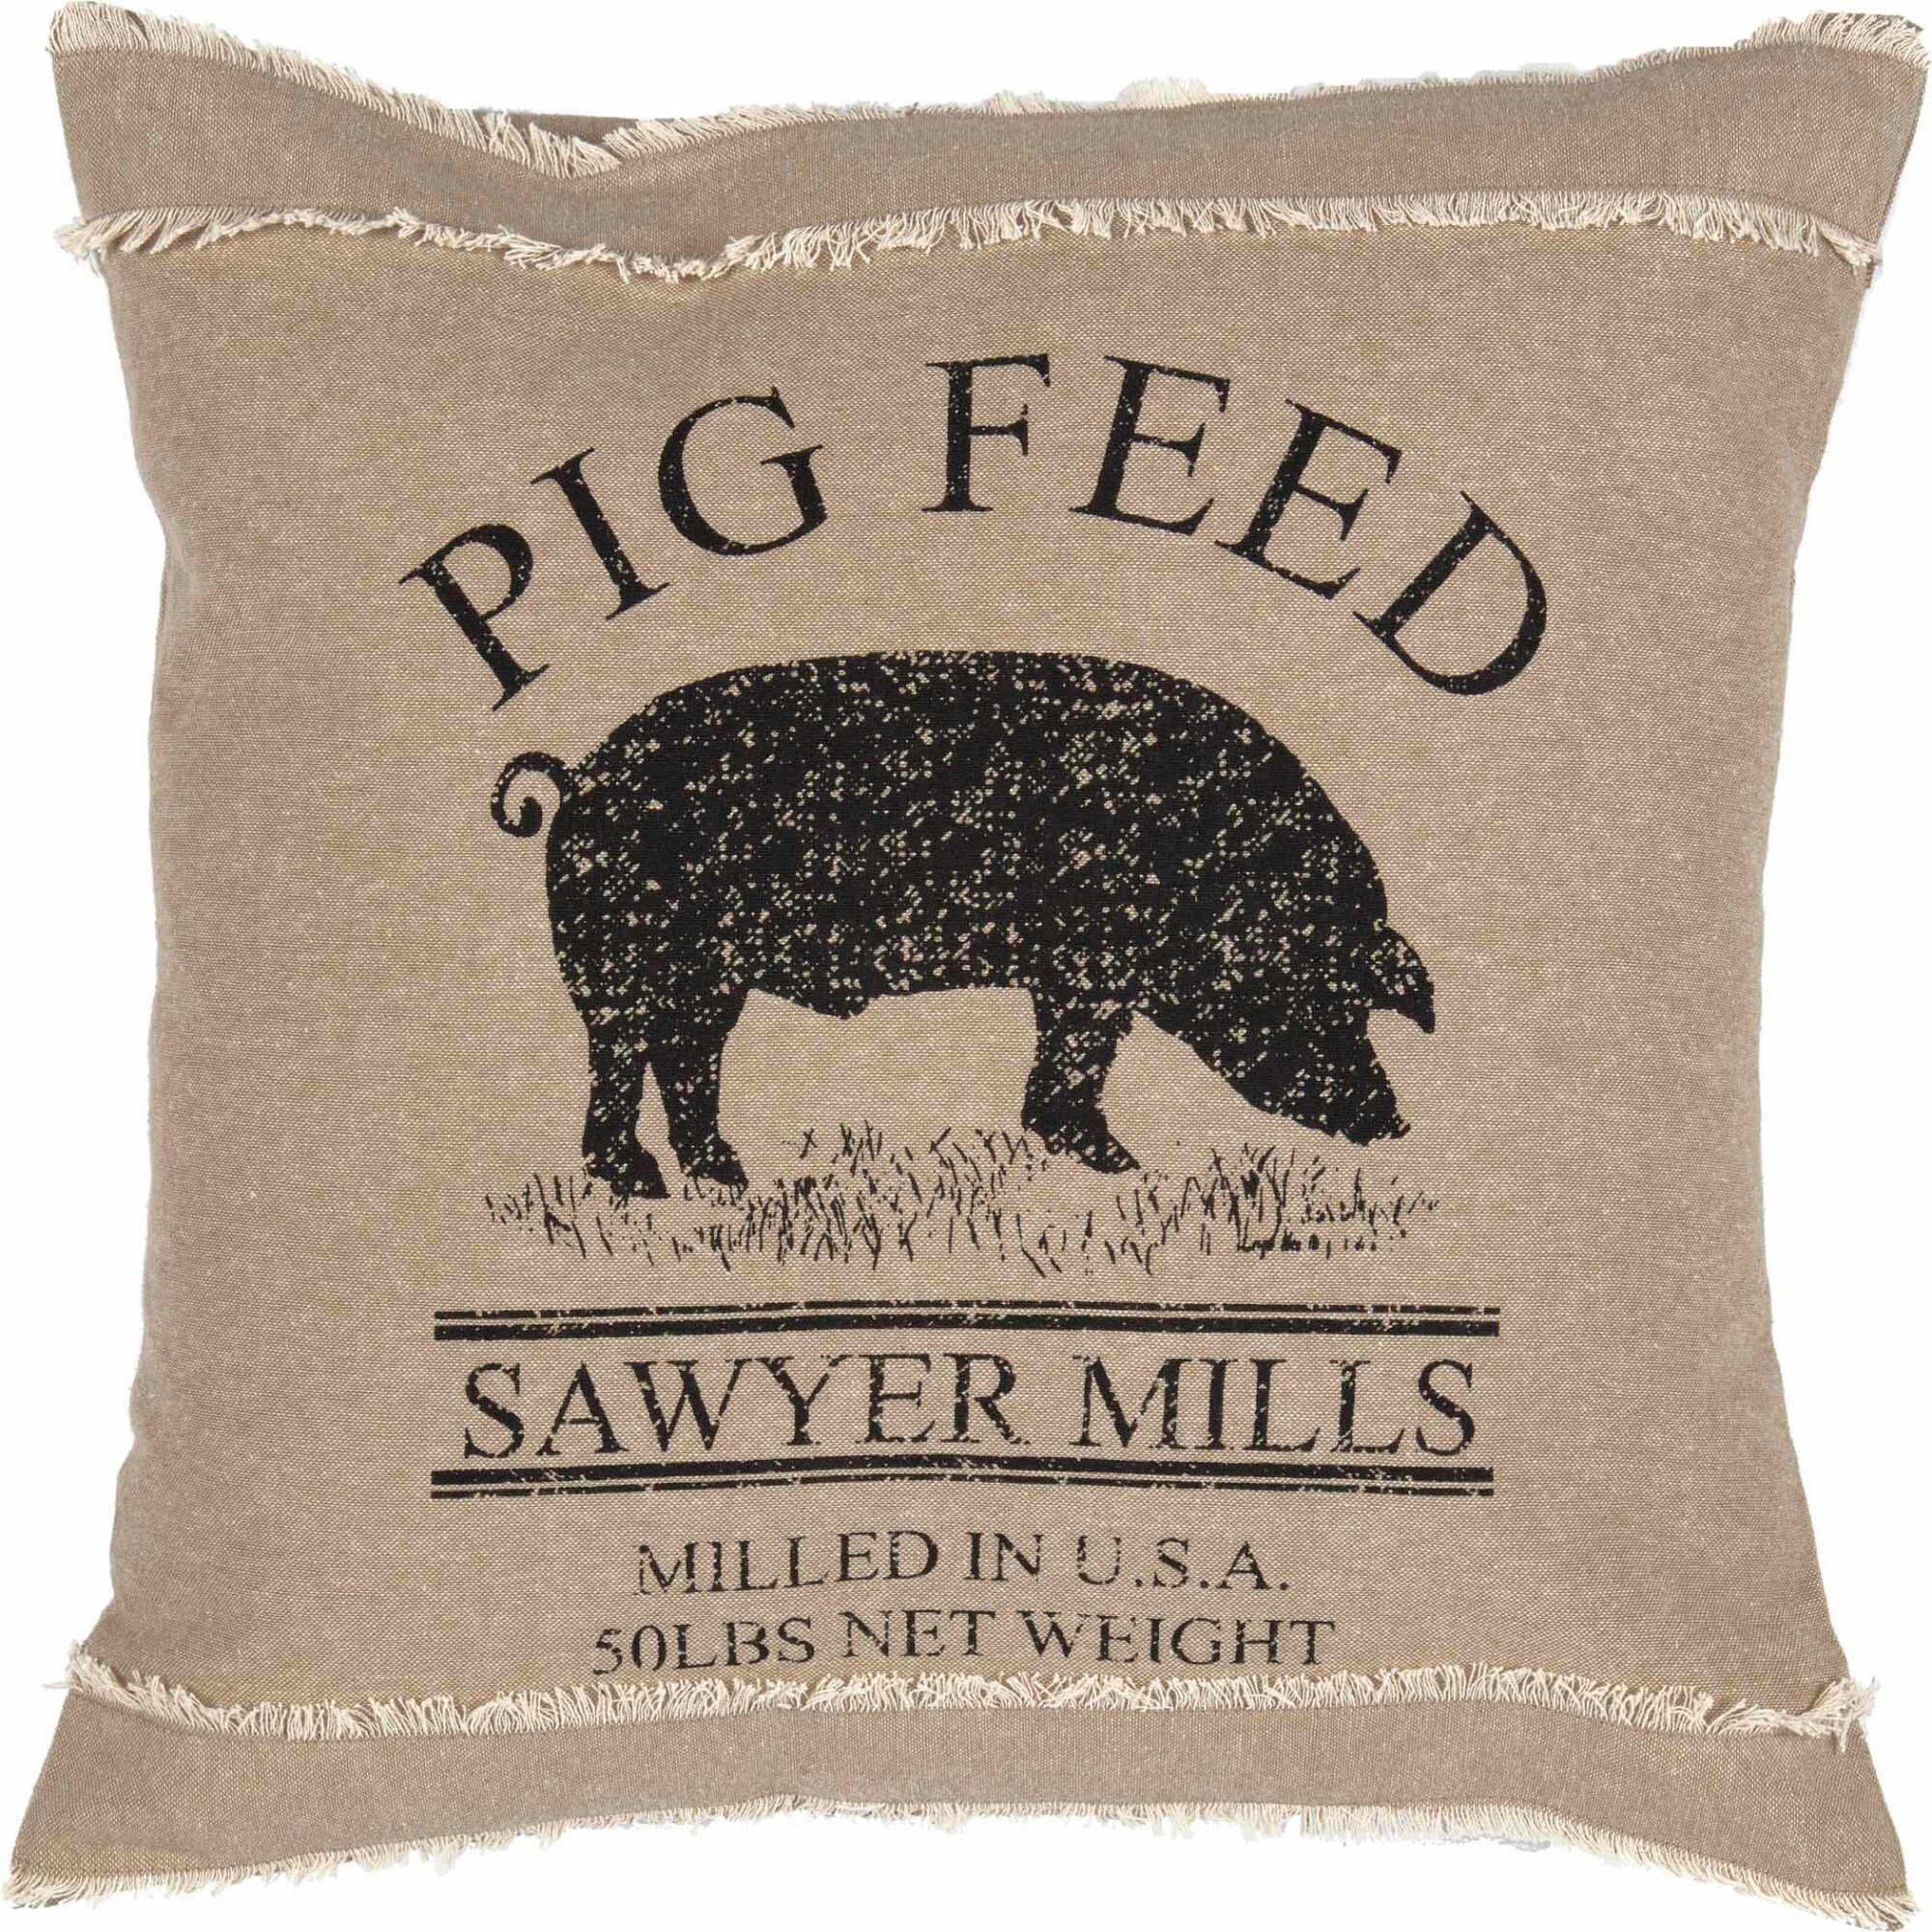 https://ak1.ostkcdn.com/images/products/is/images/direct/3603bb8e6b7c46a5bd17c953a184033efe9e6c89/Sawyer-Mill-Charcoal-Pig-Pillow-18x18.jpg